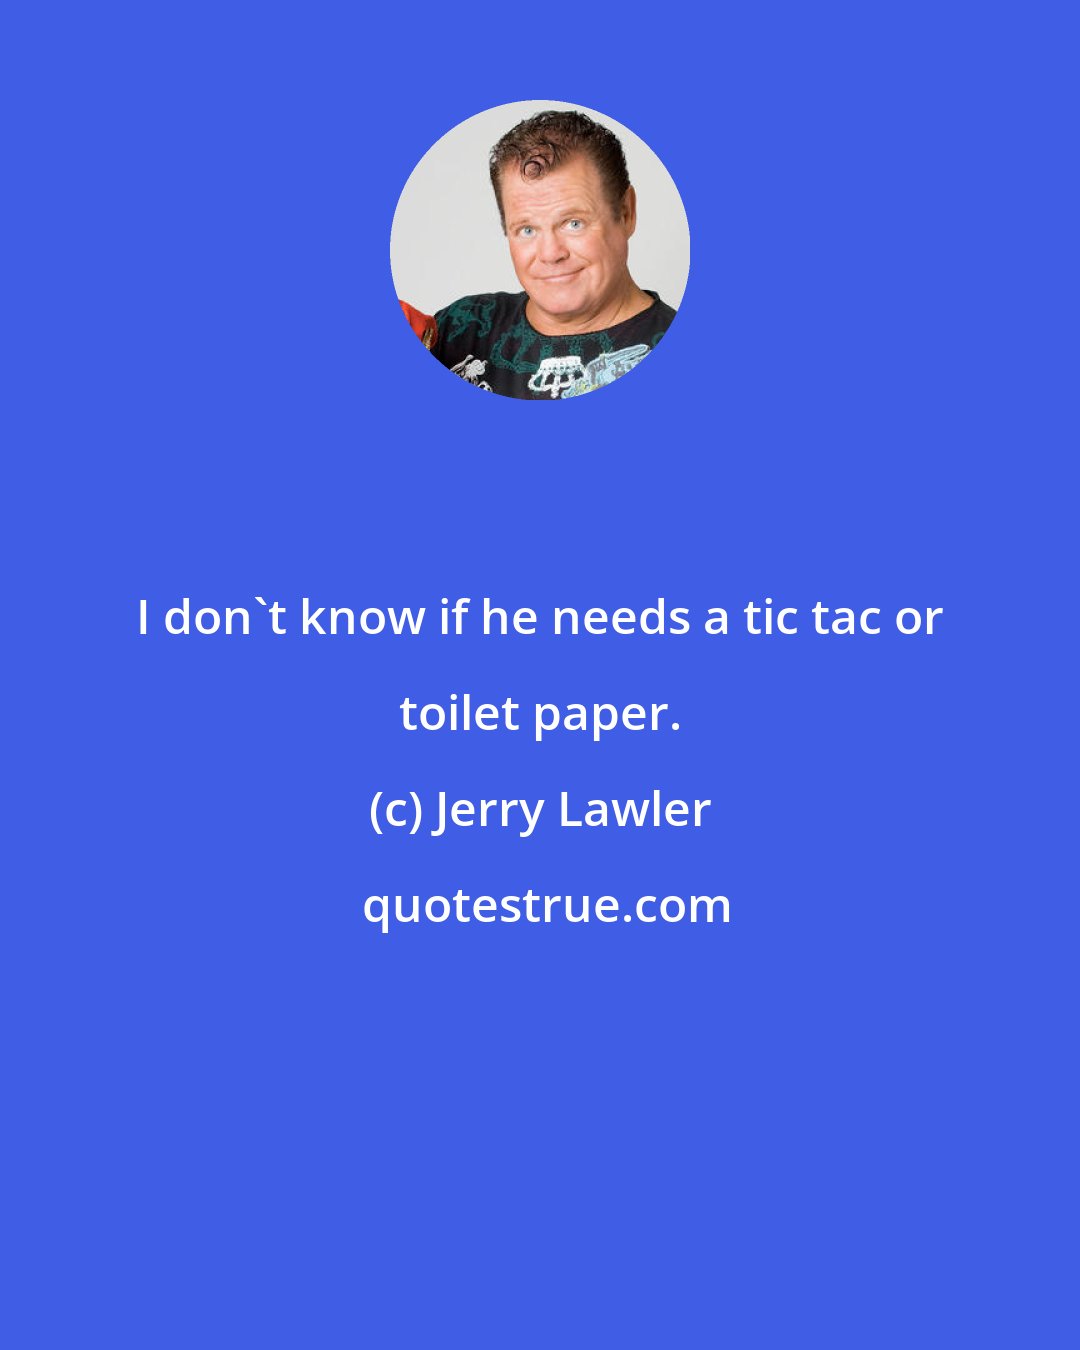 Jerry Lawler: I don't know if he needs a tic tac or toilet paper.